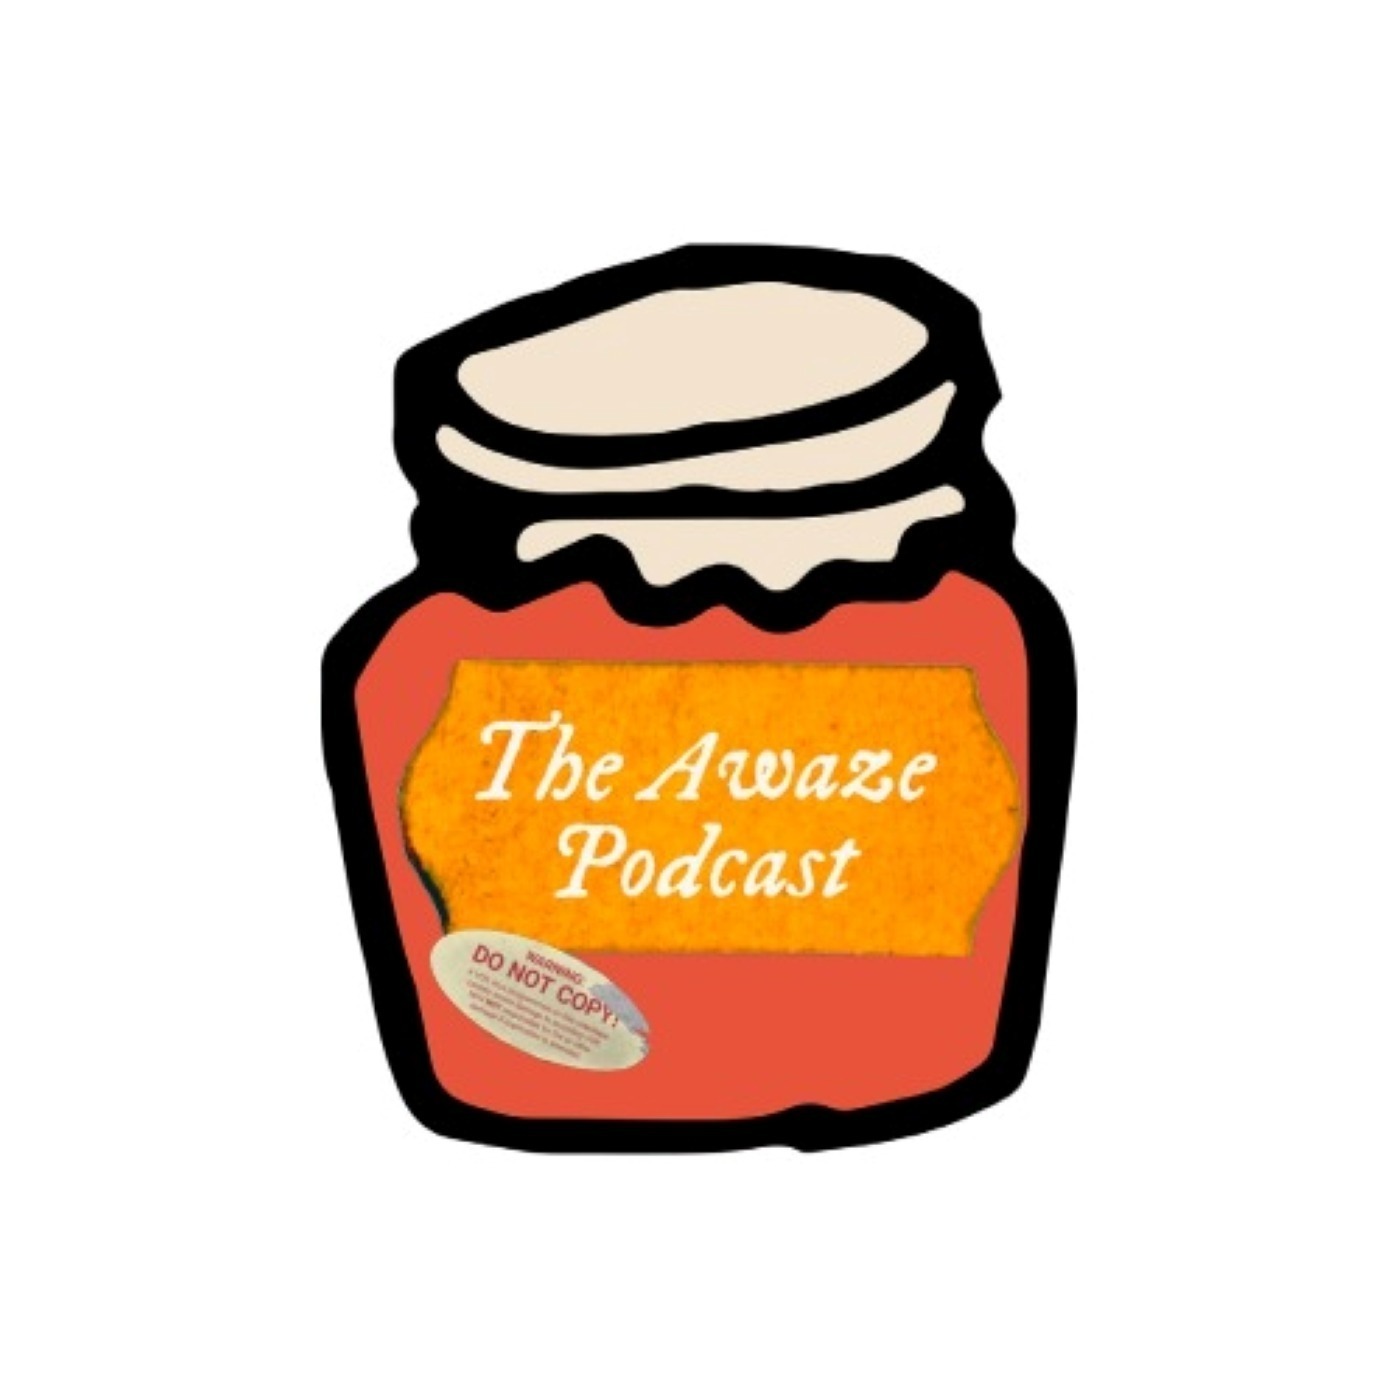 Welcome to The Awaze Podcast